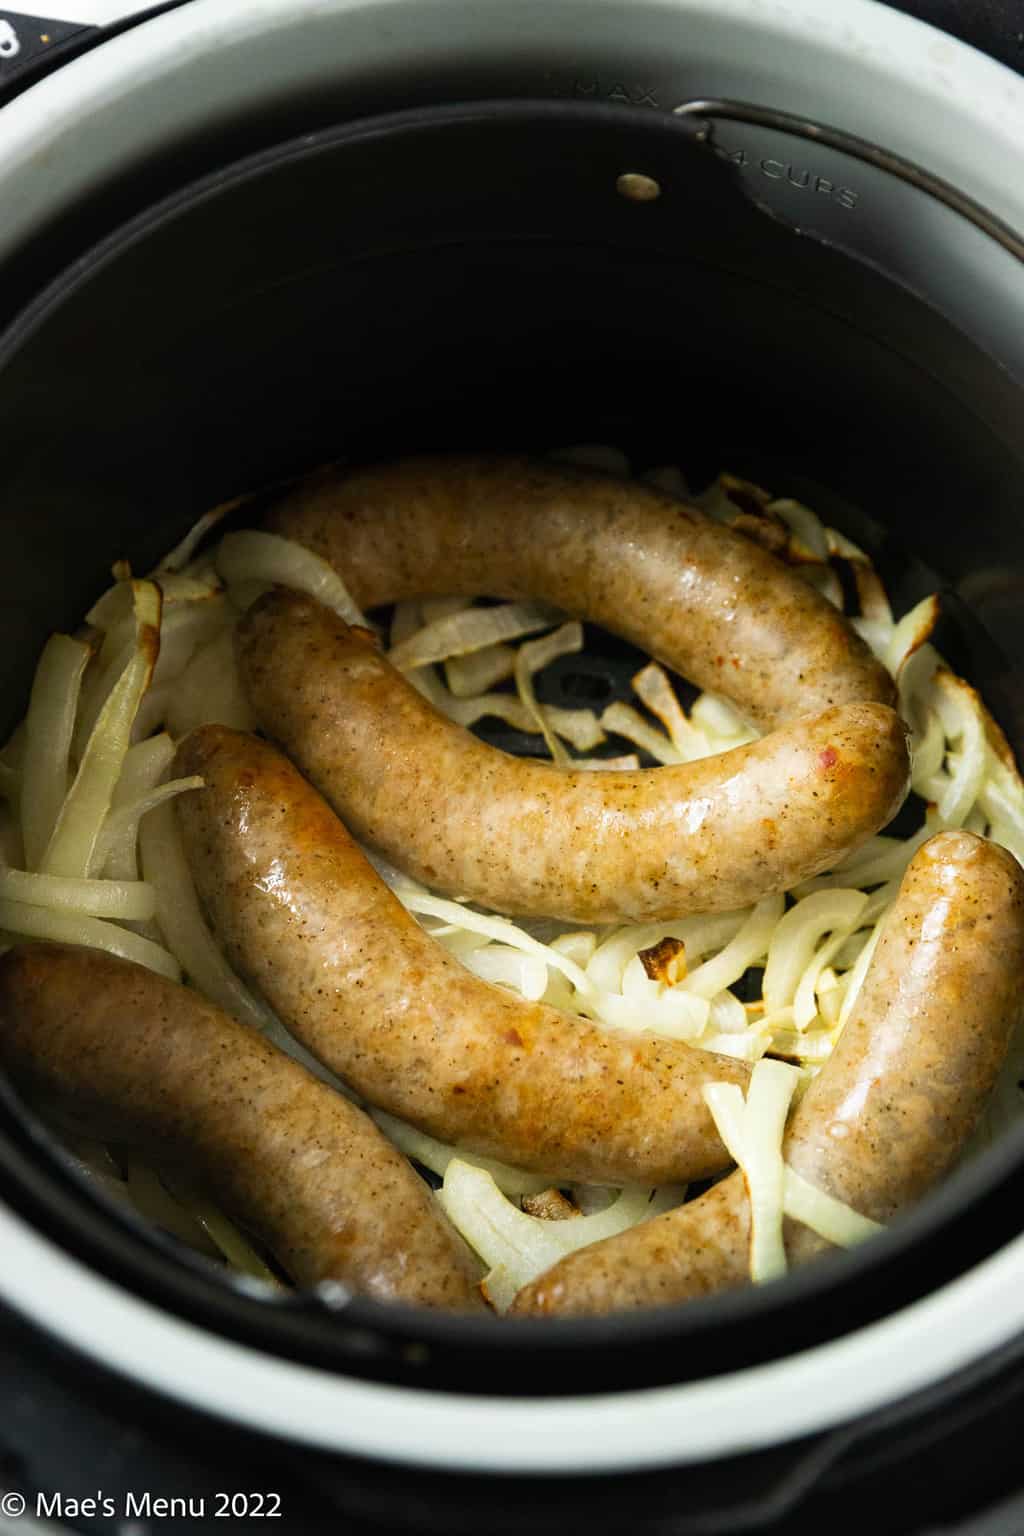 An angled shot of an air fryer with onions and fried brats.